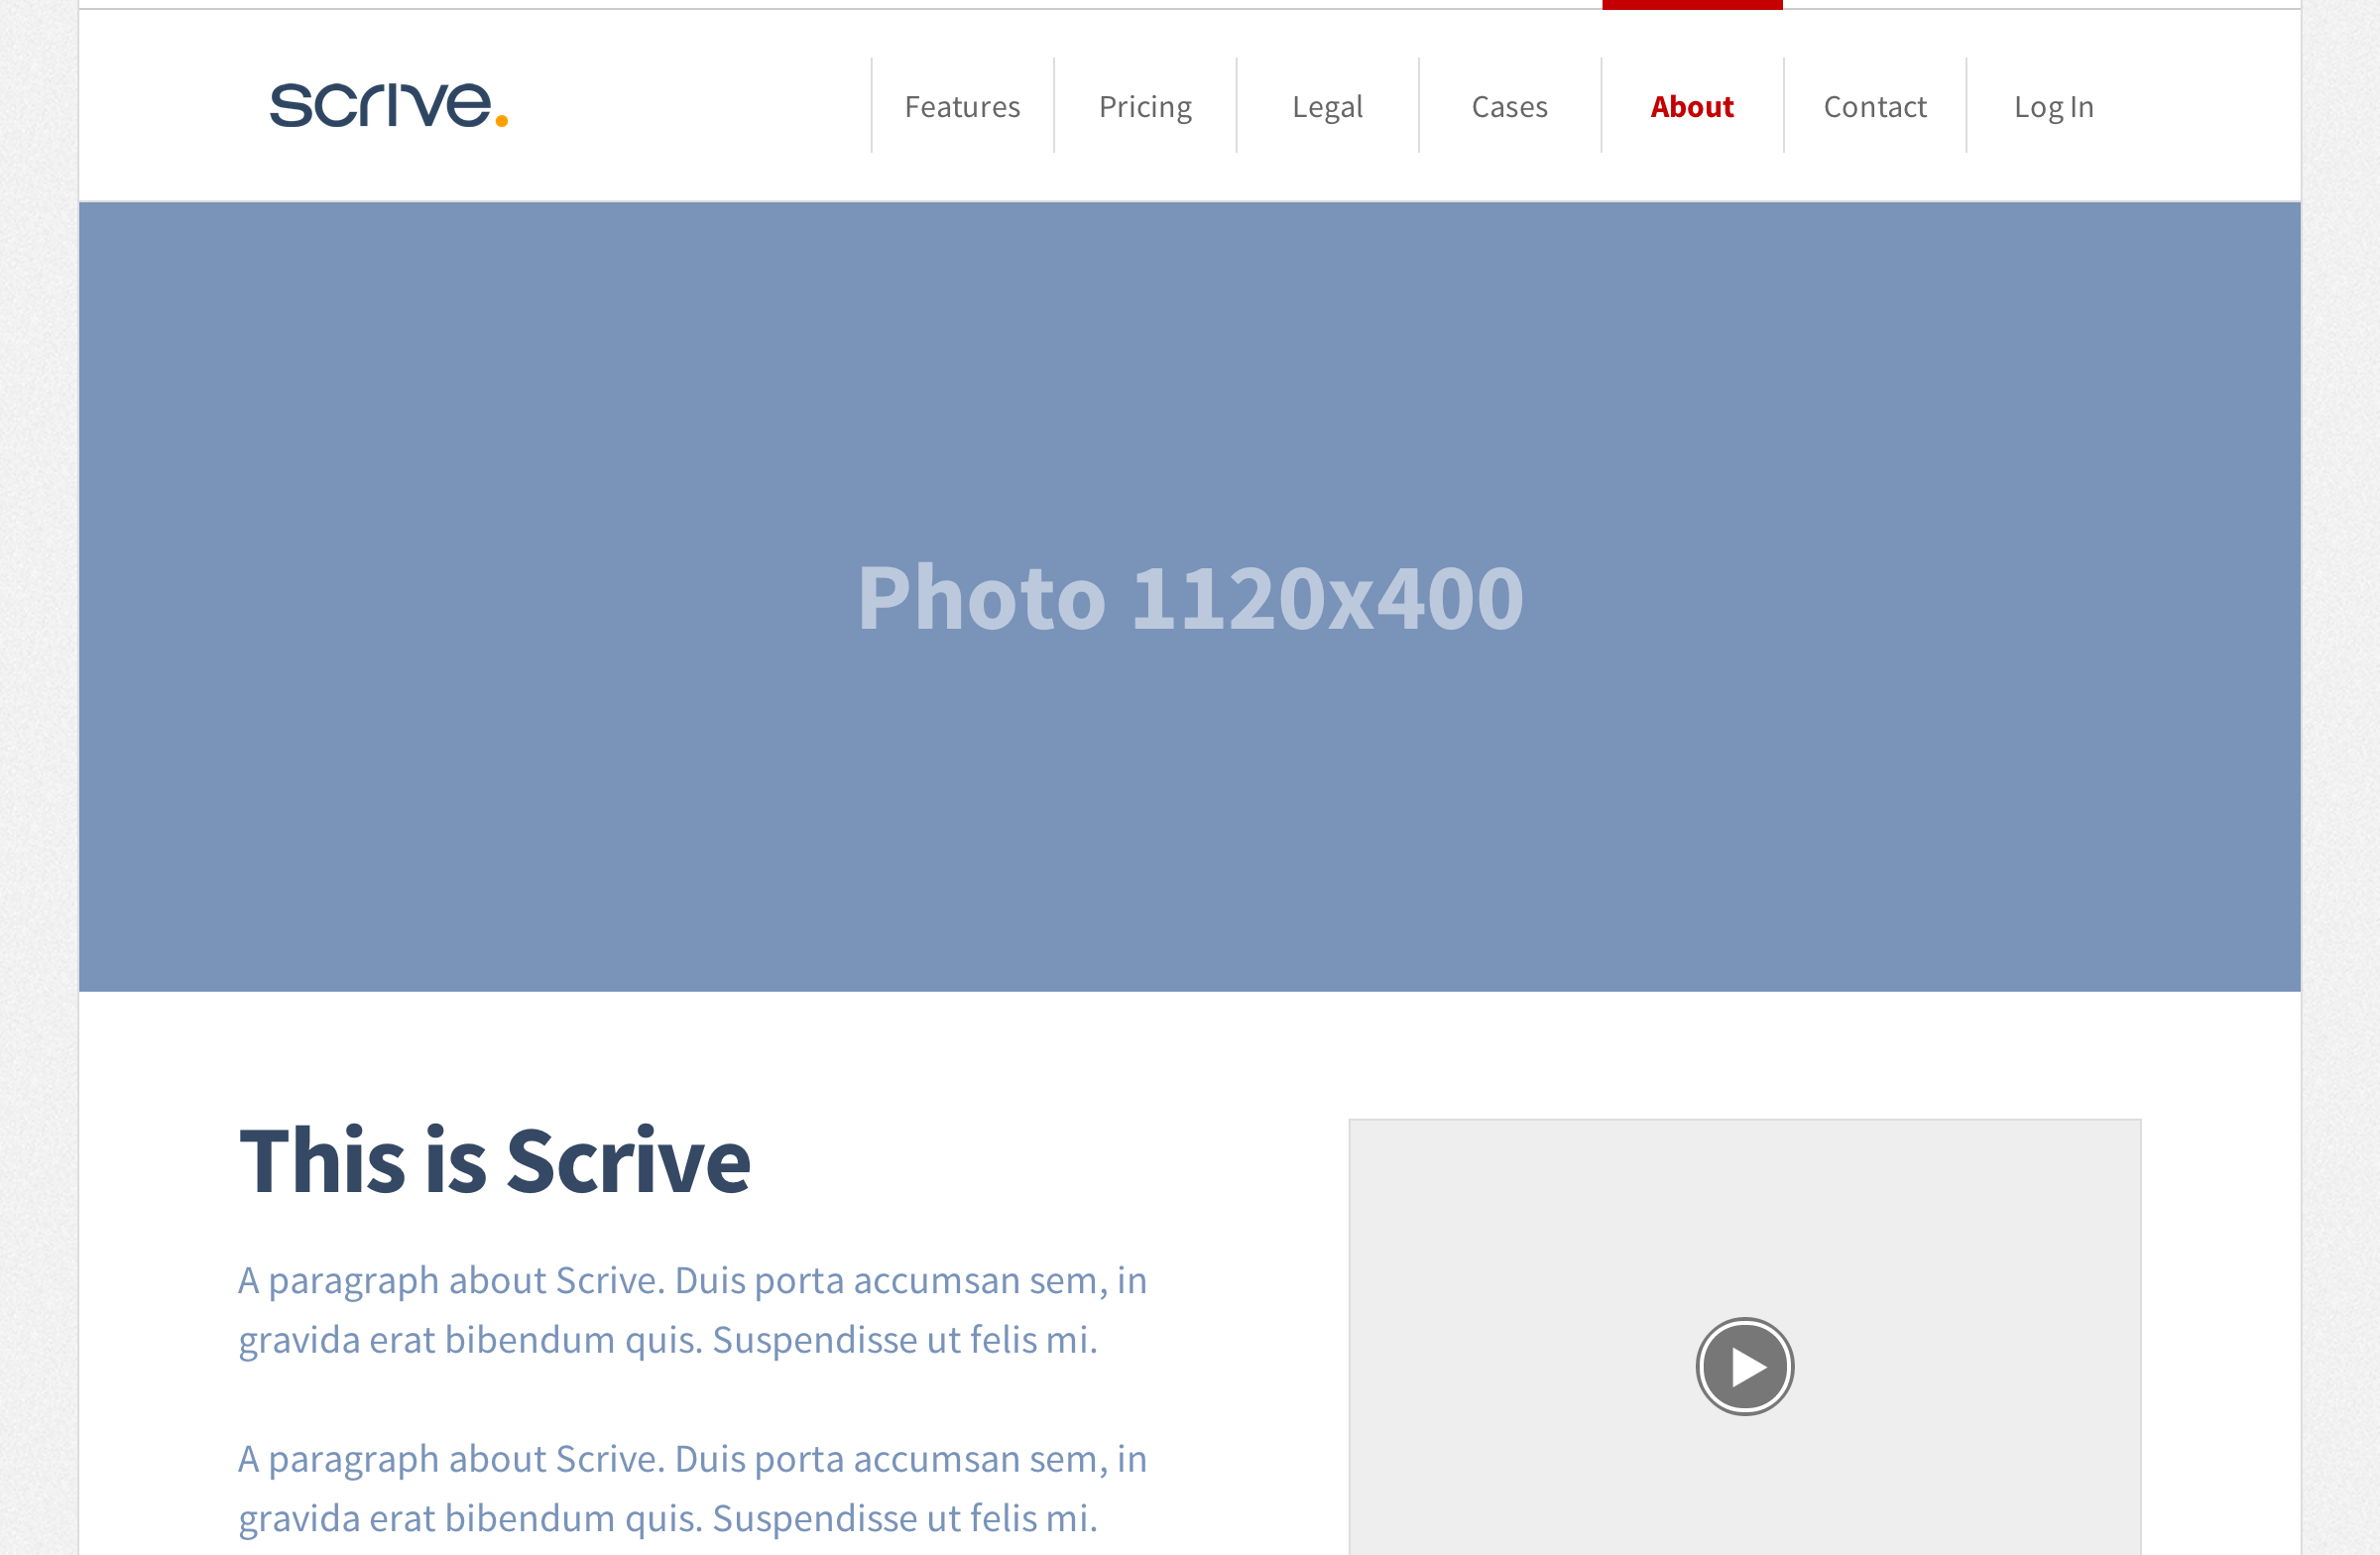 Scrive's about page